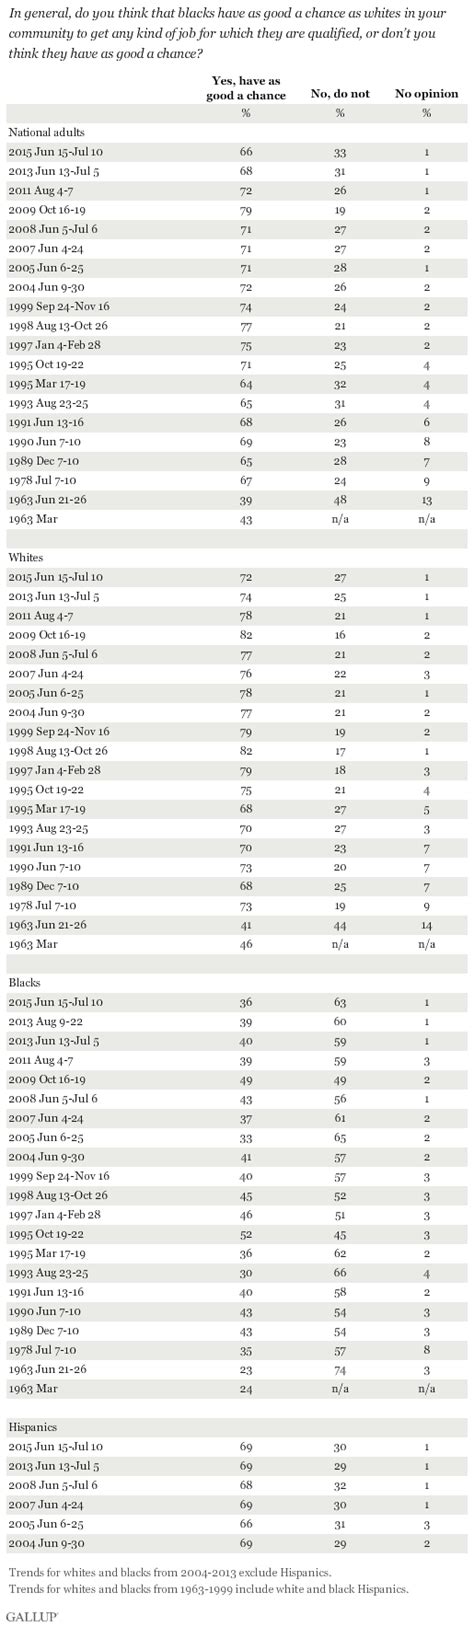 race relations gallup historical trends